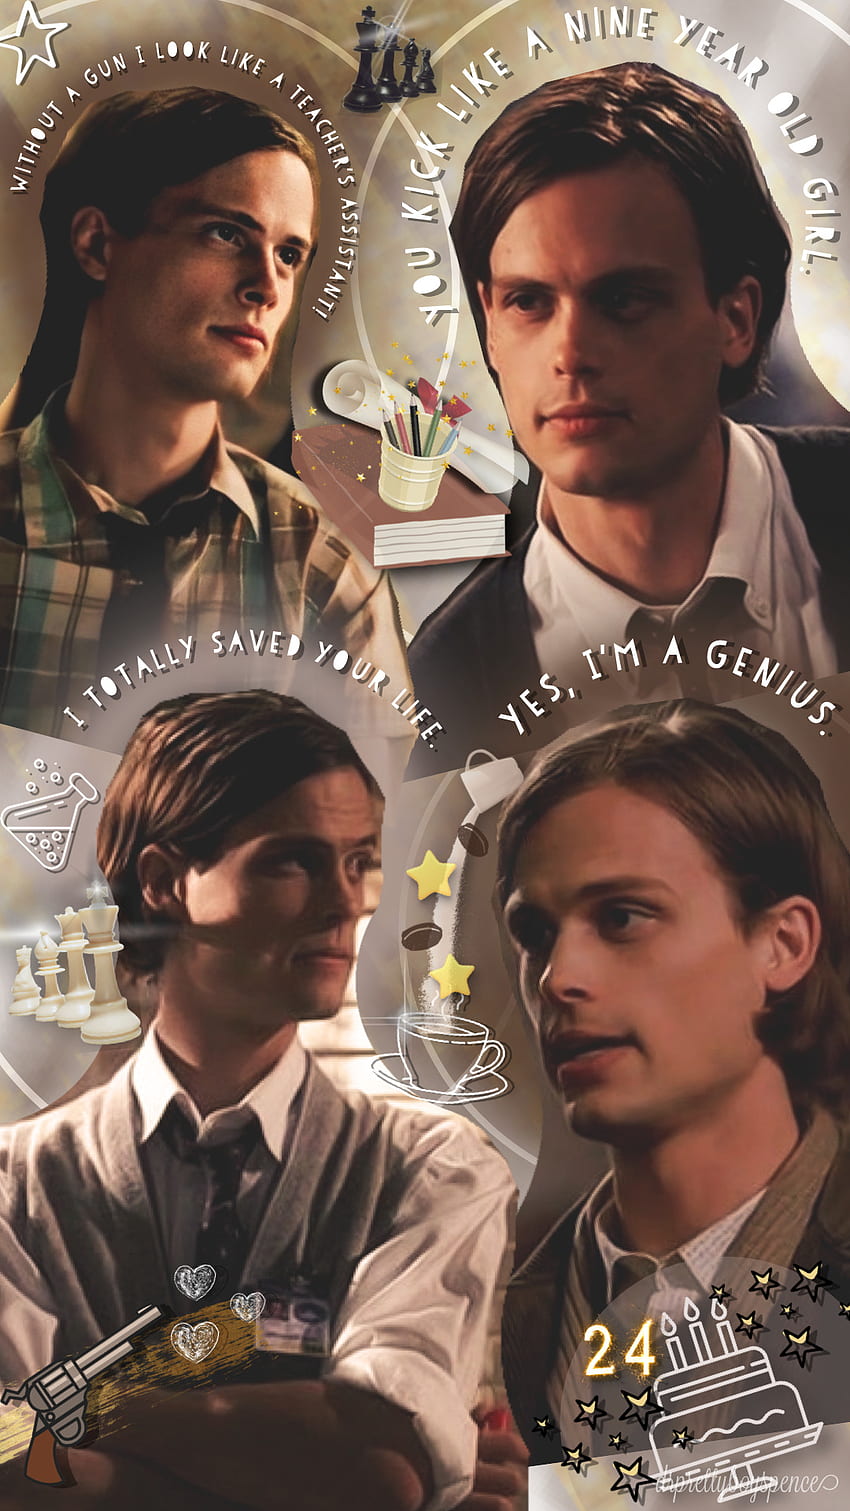 is there any more jello?, Spencer Reid Criminal Minds HD phone wallpaper